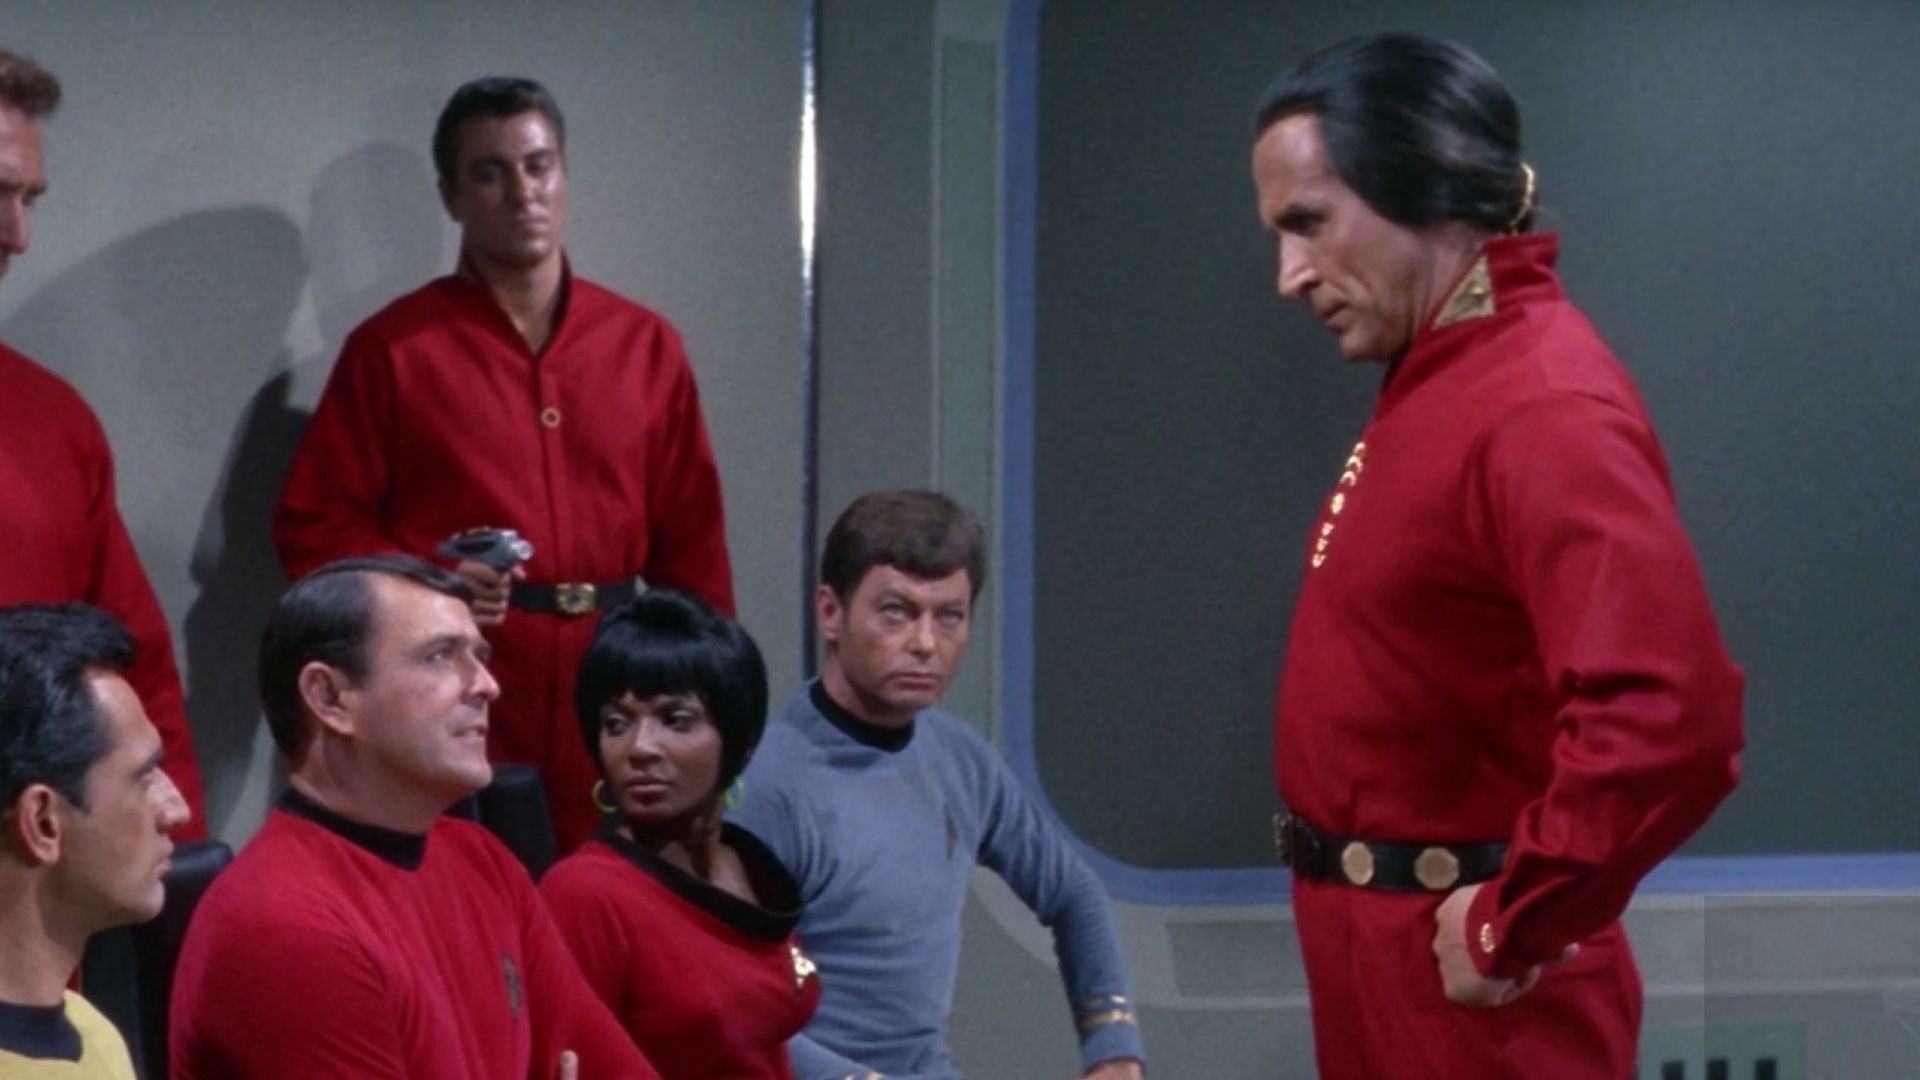 <p>                     <strong>Season 1, Episode 22</strong>                   </p>                                      <p>                     <strong>Original airdate:</strong> February 16, 1967                    </p>                                      <p>                     If you read our list of Star Trek movies ranked worst to best, you already know why this episode makes the list. Space Seed introduces the one and only Khan Noonien Singh and sets up the action that will later take place in the film The Wrath of Khan.                    </p>                                      <p>                     The Enterprise comes across Khan and his followers in stasis. Upon their revival, they attempt to take over the Enterprise. Their plan is foiled and Kirk exiles them to Ceti Alpha V…and we all know what happens next. Even if it didn’t precede such a phenomenal film, Space Seed would make this list as an example of how fast and loose Kirk often plays with others’ lives.                    </p>